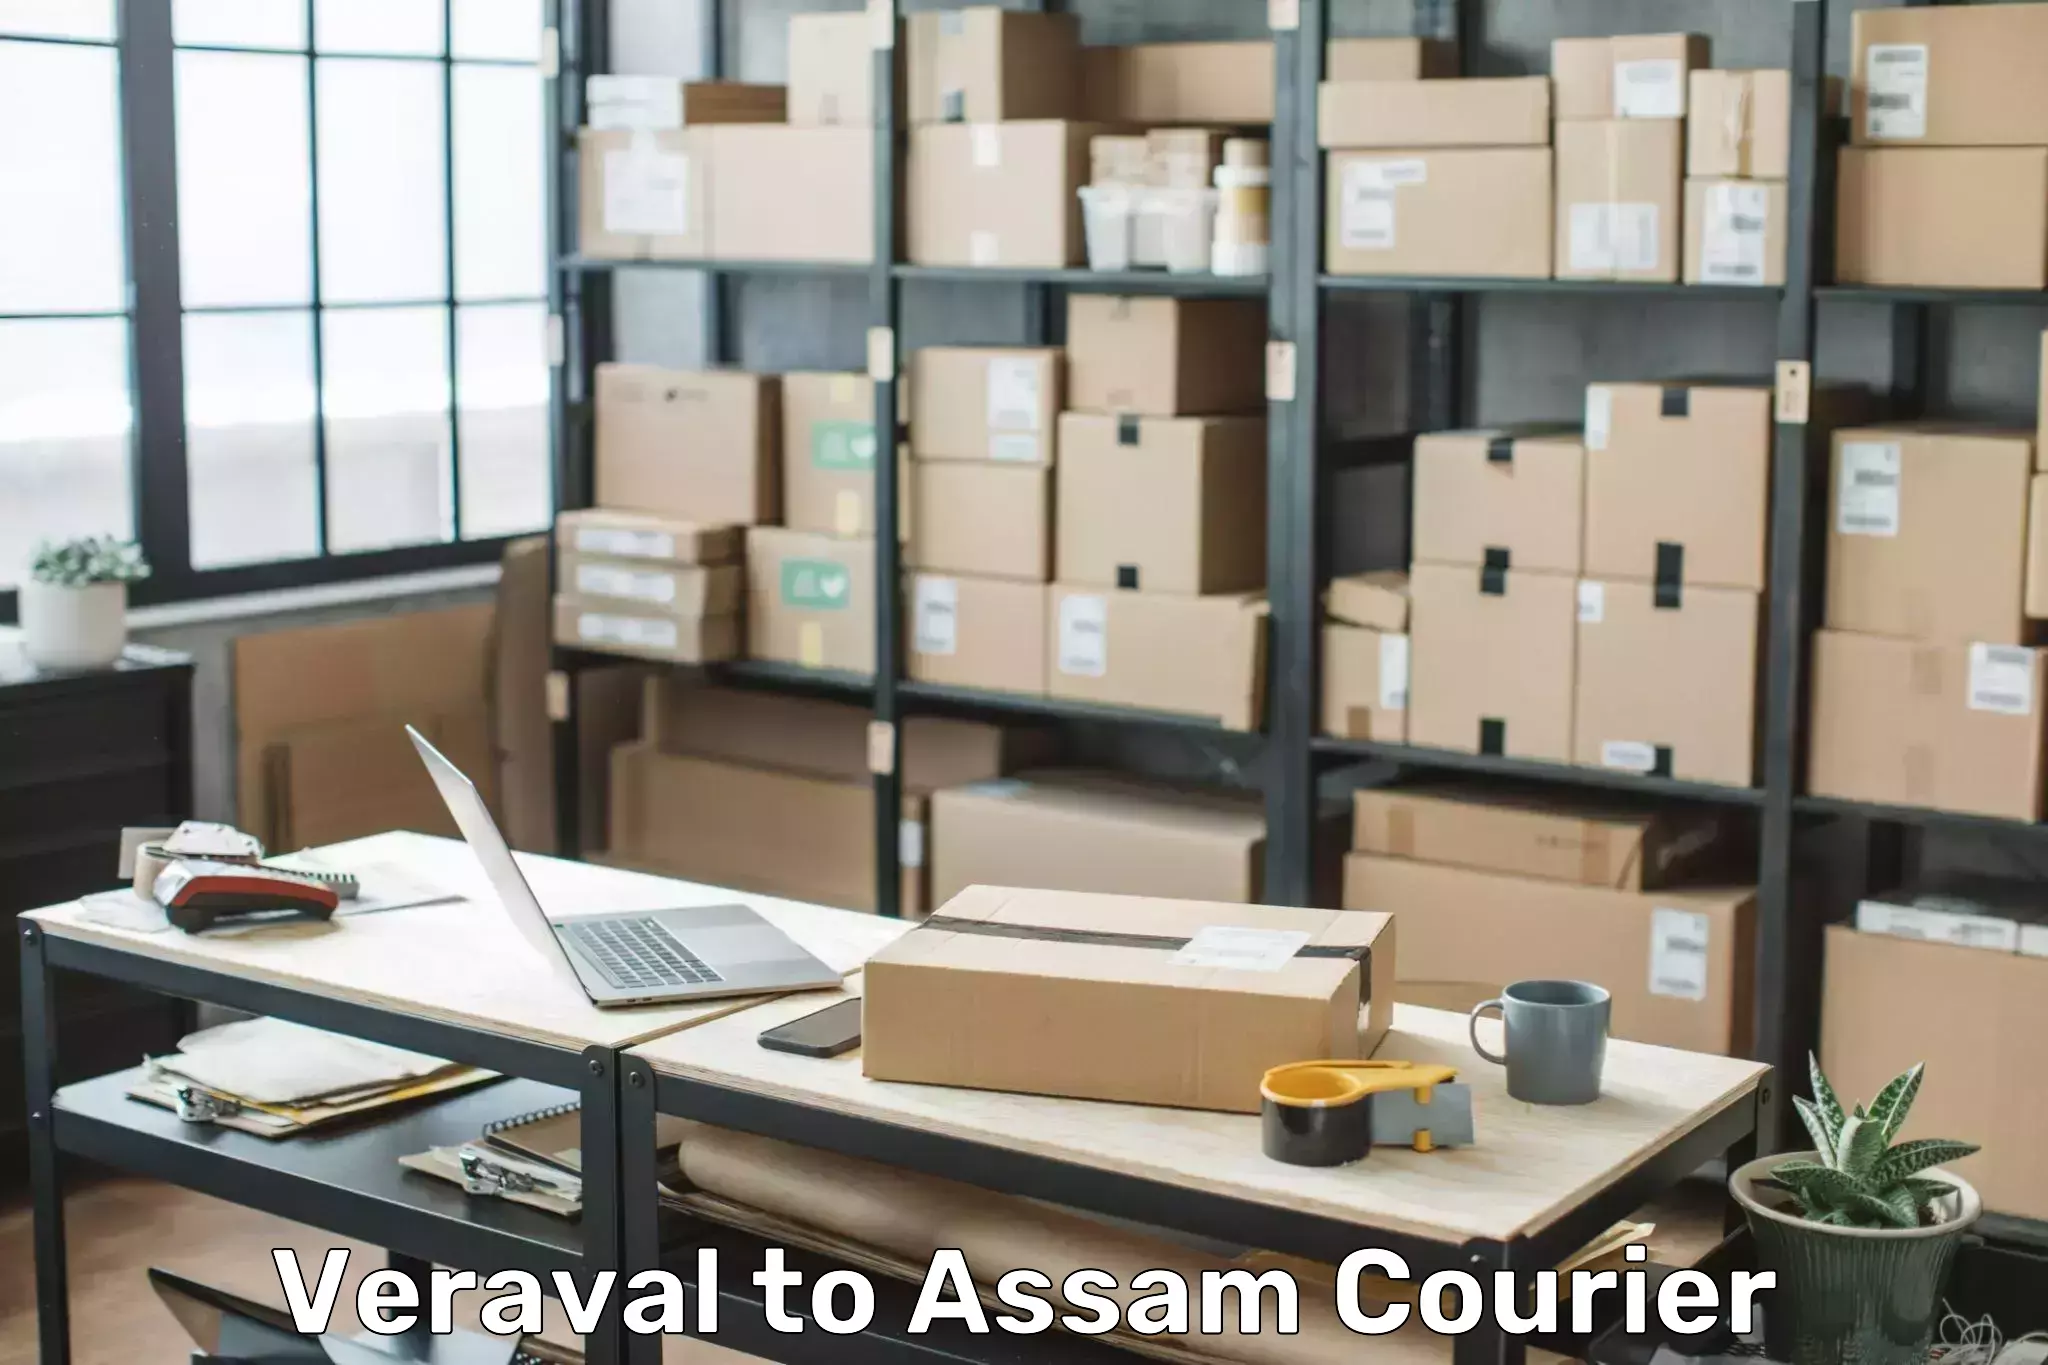 Hassle-free luggage shipping Veraval to Kampur